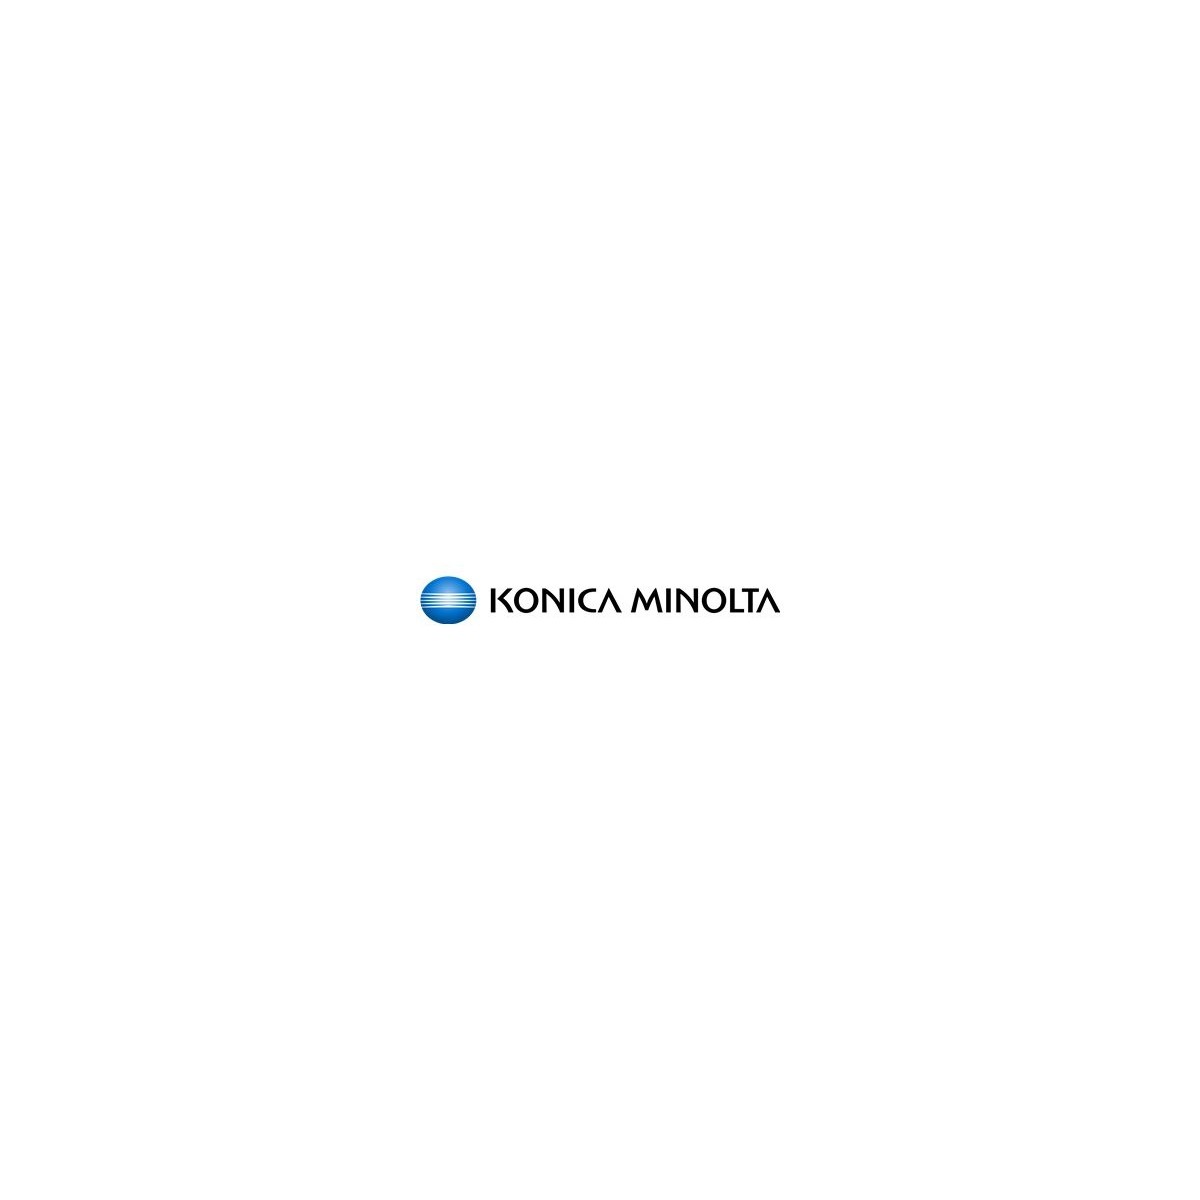 Konica Minolta Lower Paper Feeder - A3 - A3 Wide - A4 - A5 - B5 - 12 x 18 - Executive - Letter - G-letter - Folio - Legal - G-Le